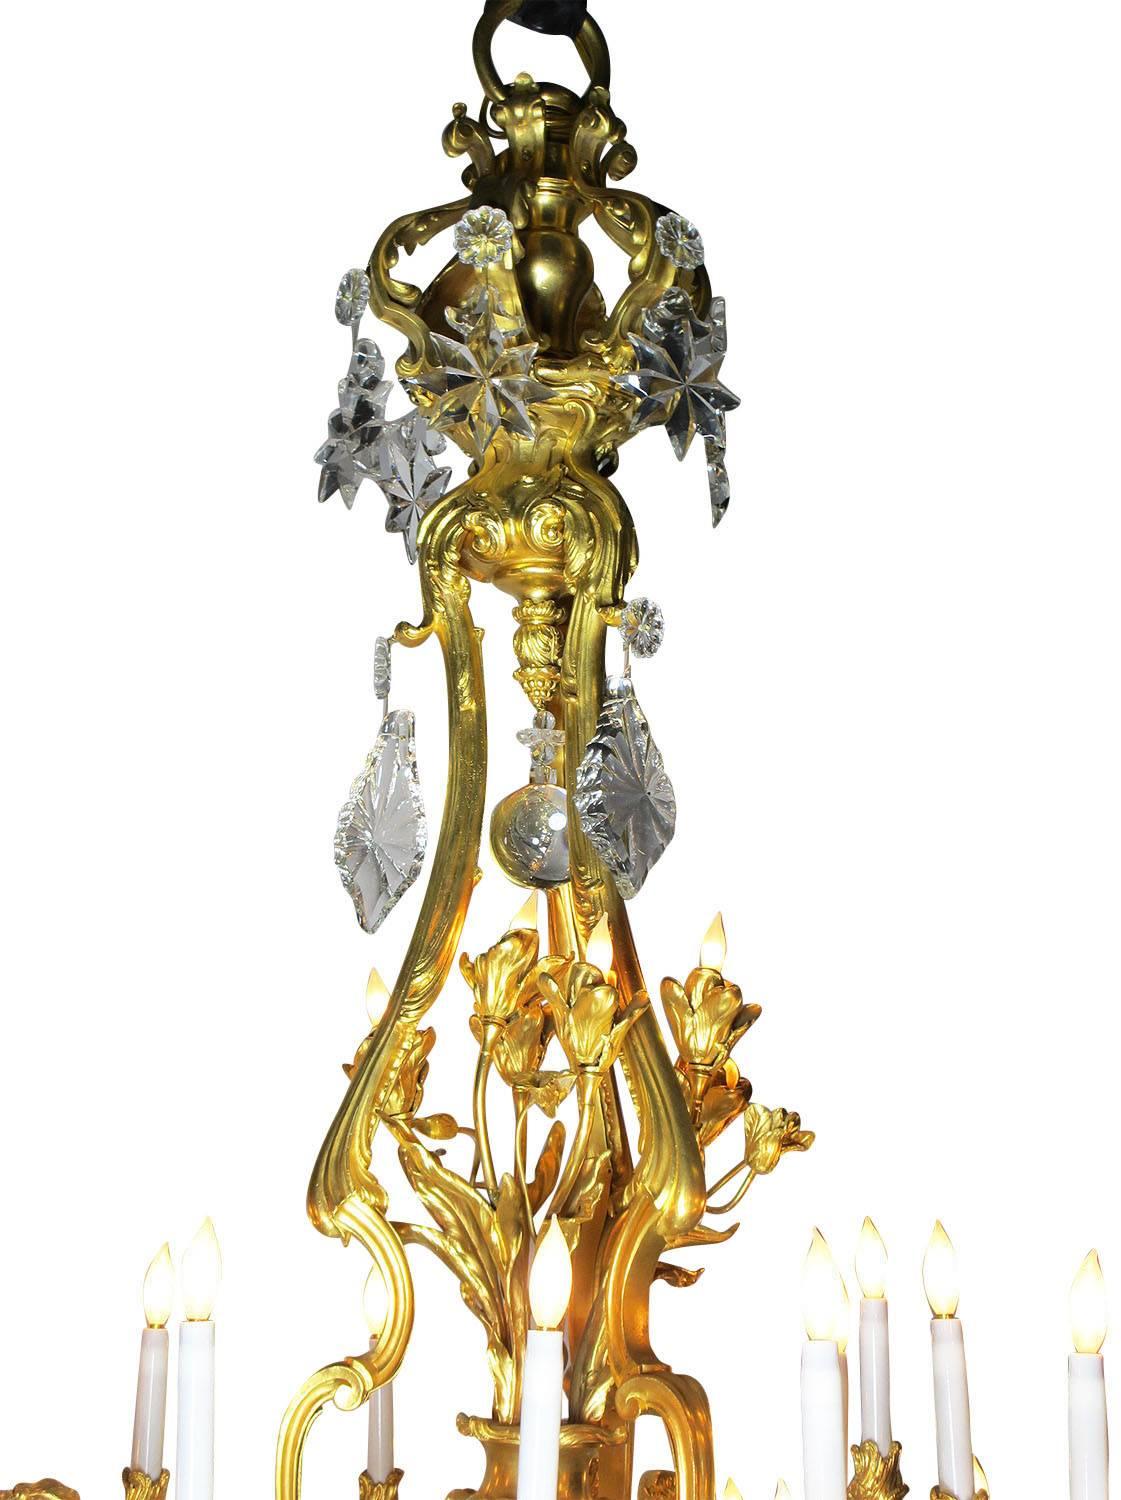 A very fine and Palatial French 19th century Louis XV style figural gilt-bronze and crystal thirty-three light chandelier, attributed to Baccarat, after a model by Jacques Caffieri (French, 1678-1755) with twenty one Candelabra Arms, three